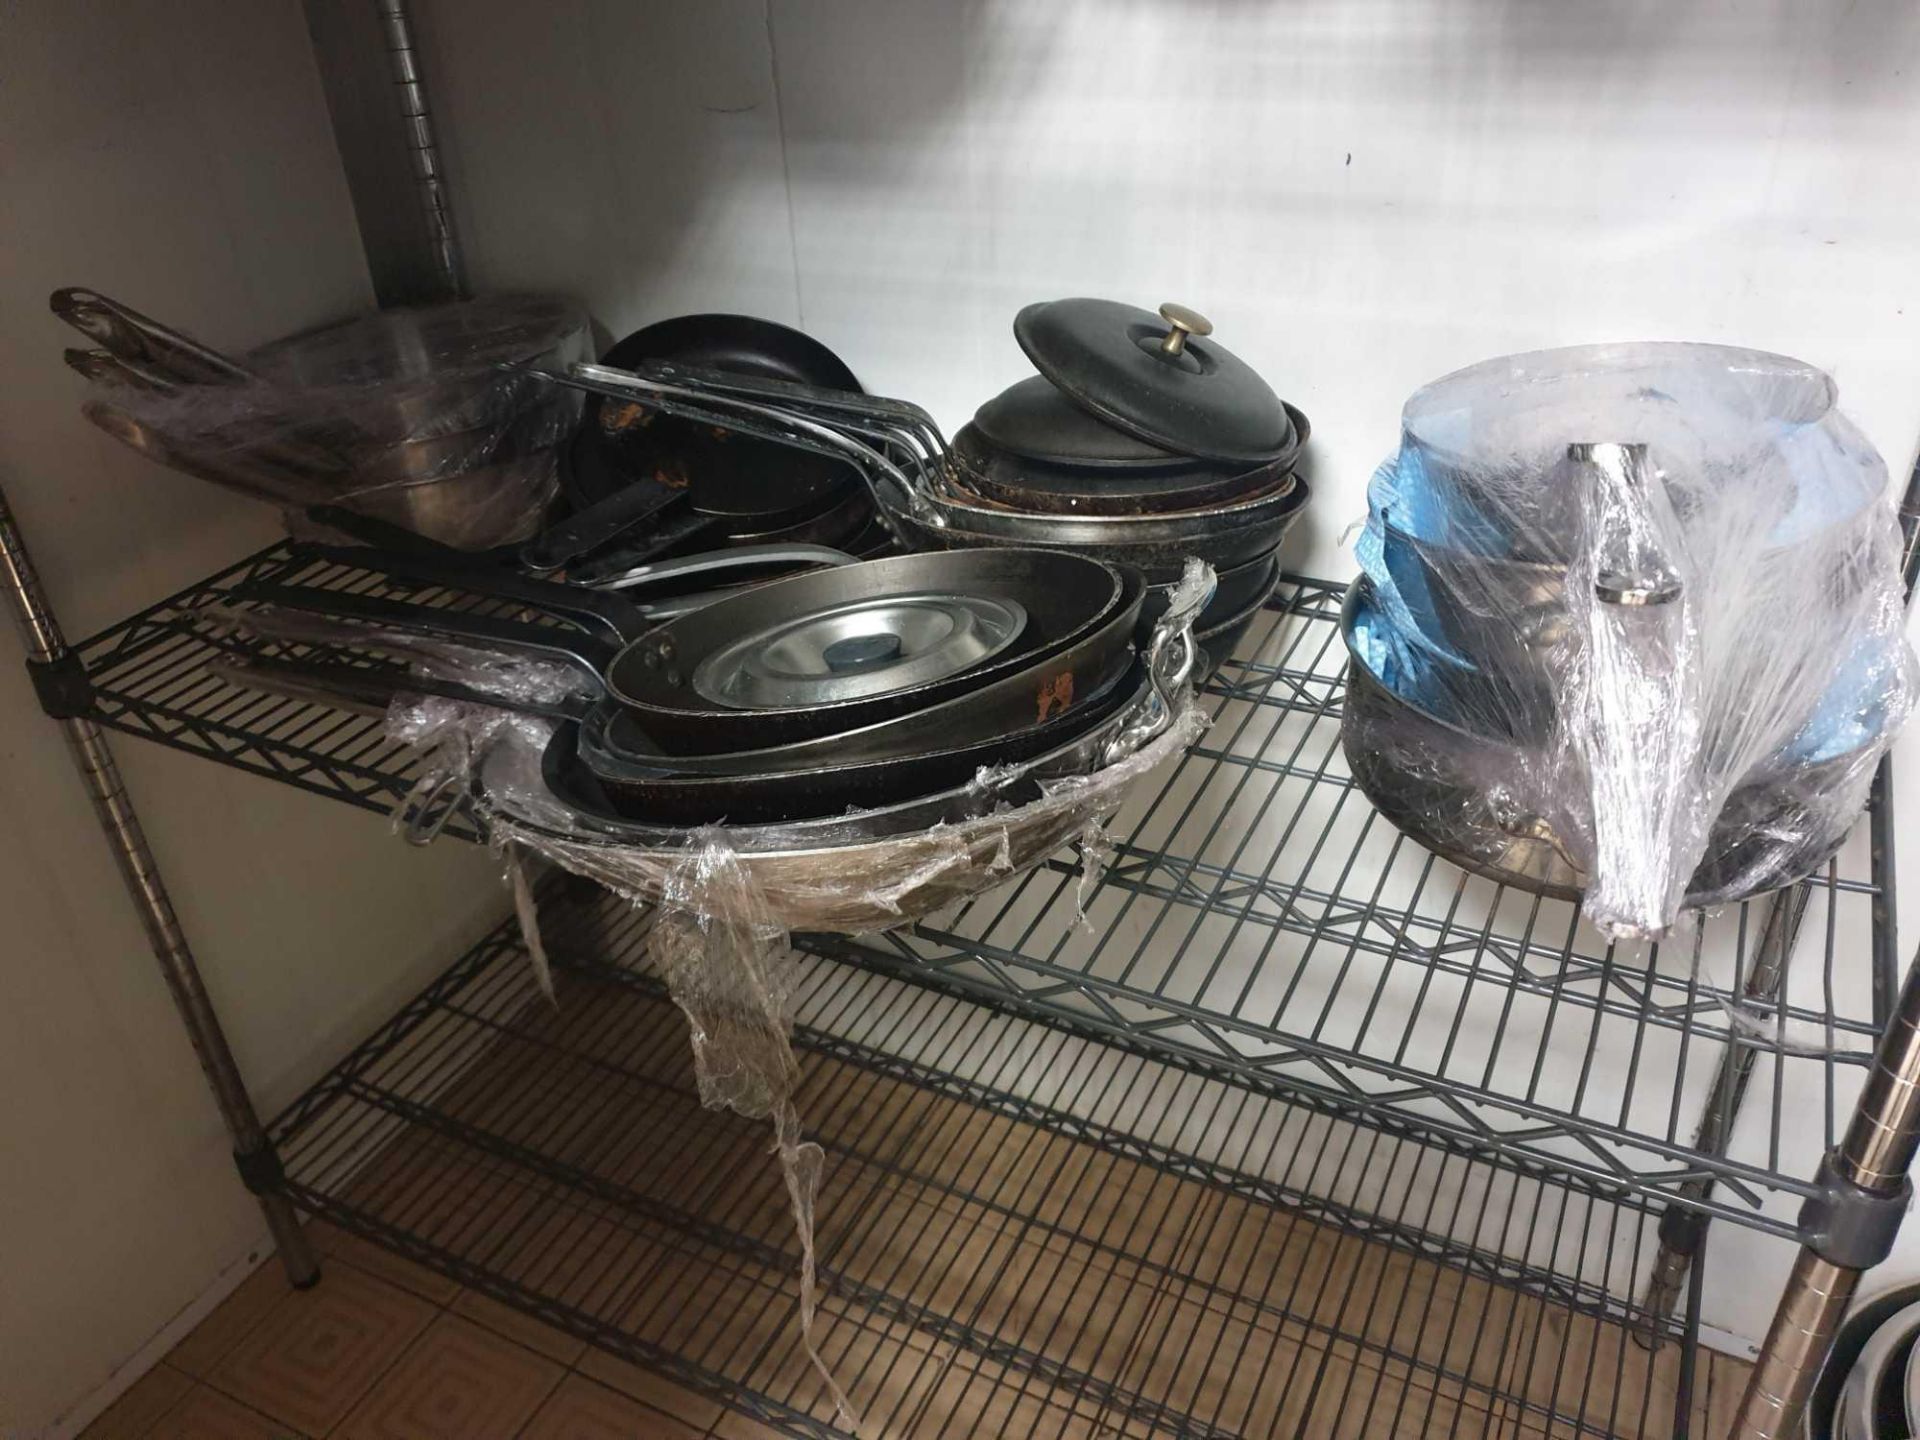 Large Quantity Frying Pans And Stainless Steel Saucepans As Found